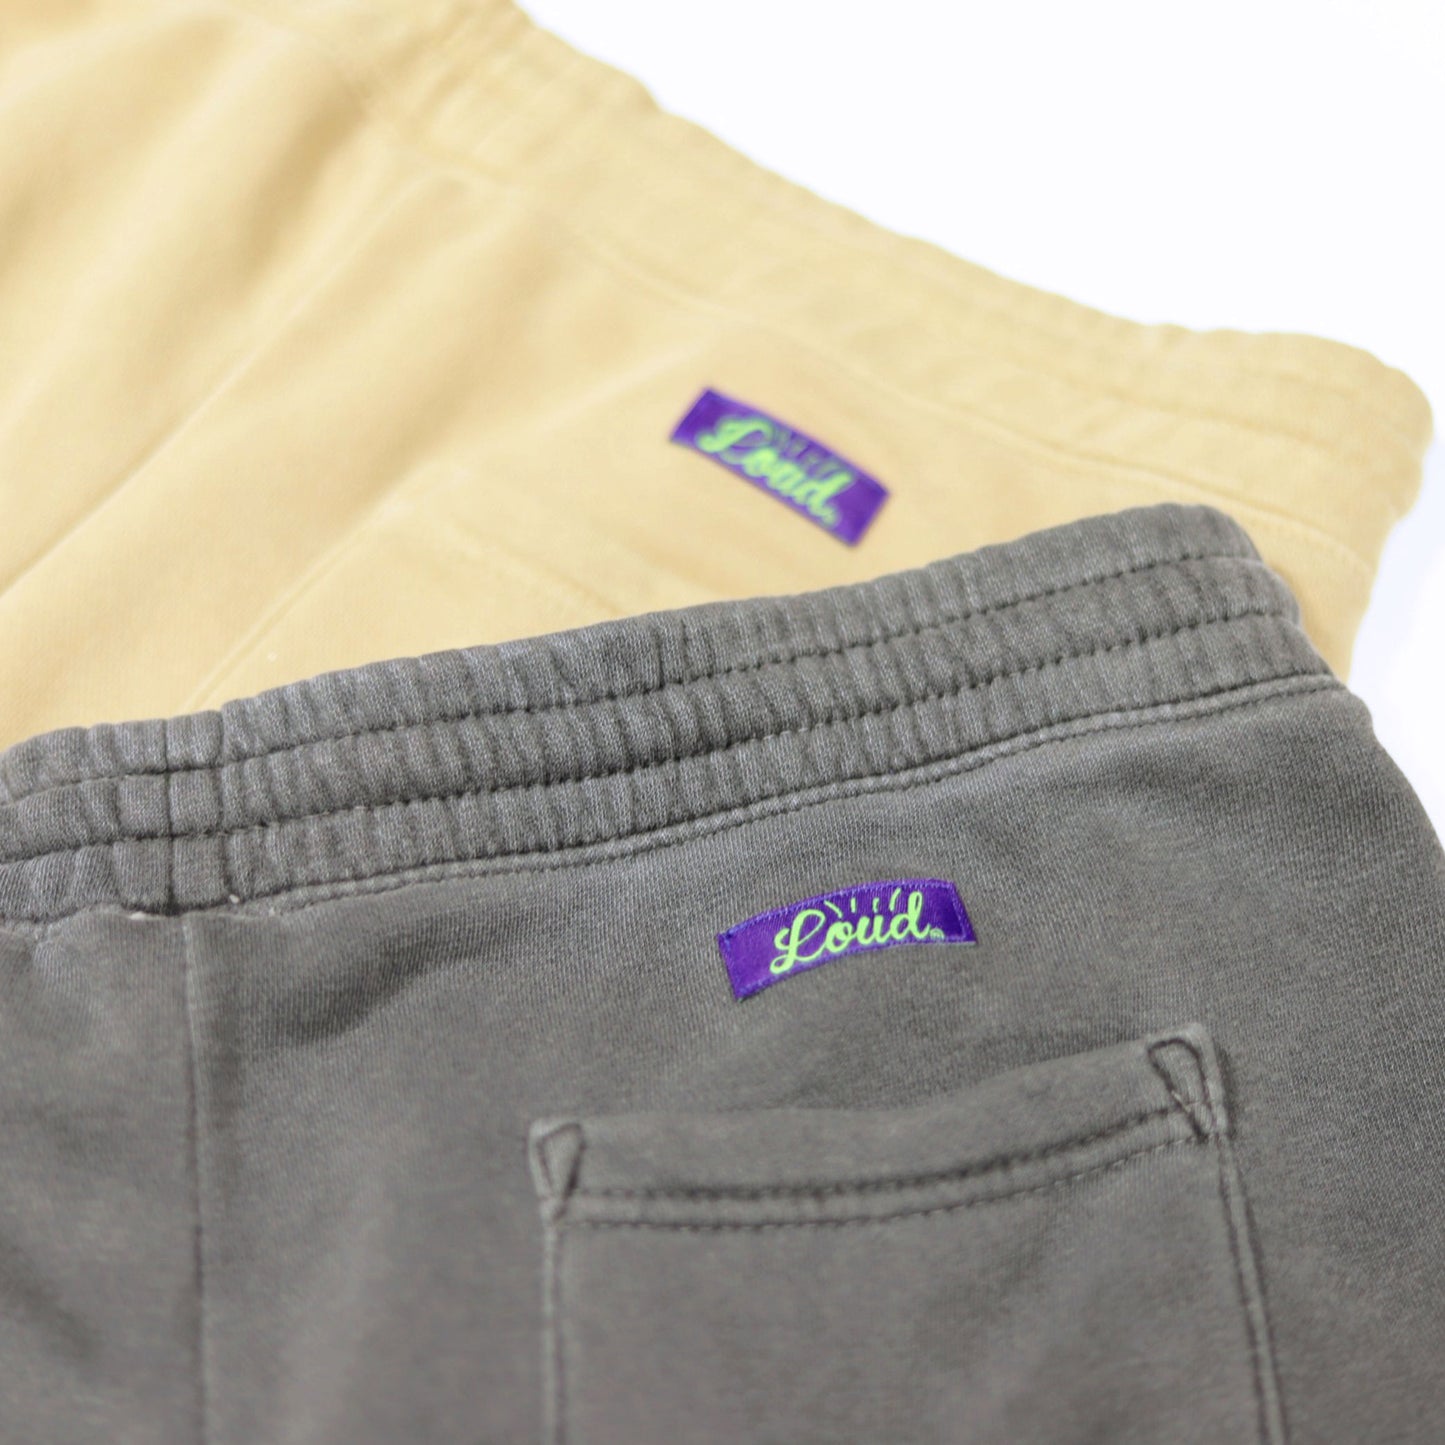 Loud v.2 Pigment Dyed Shorts - Sand/Brown